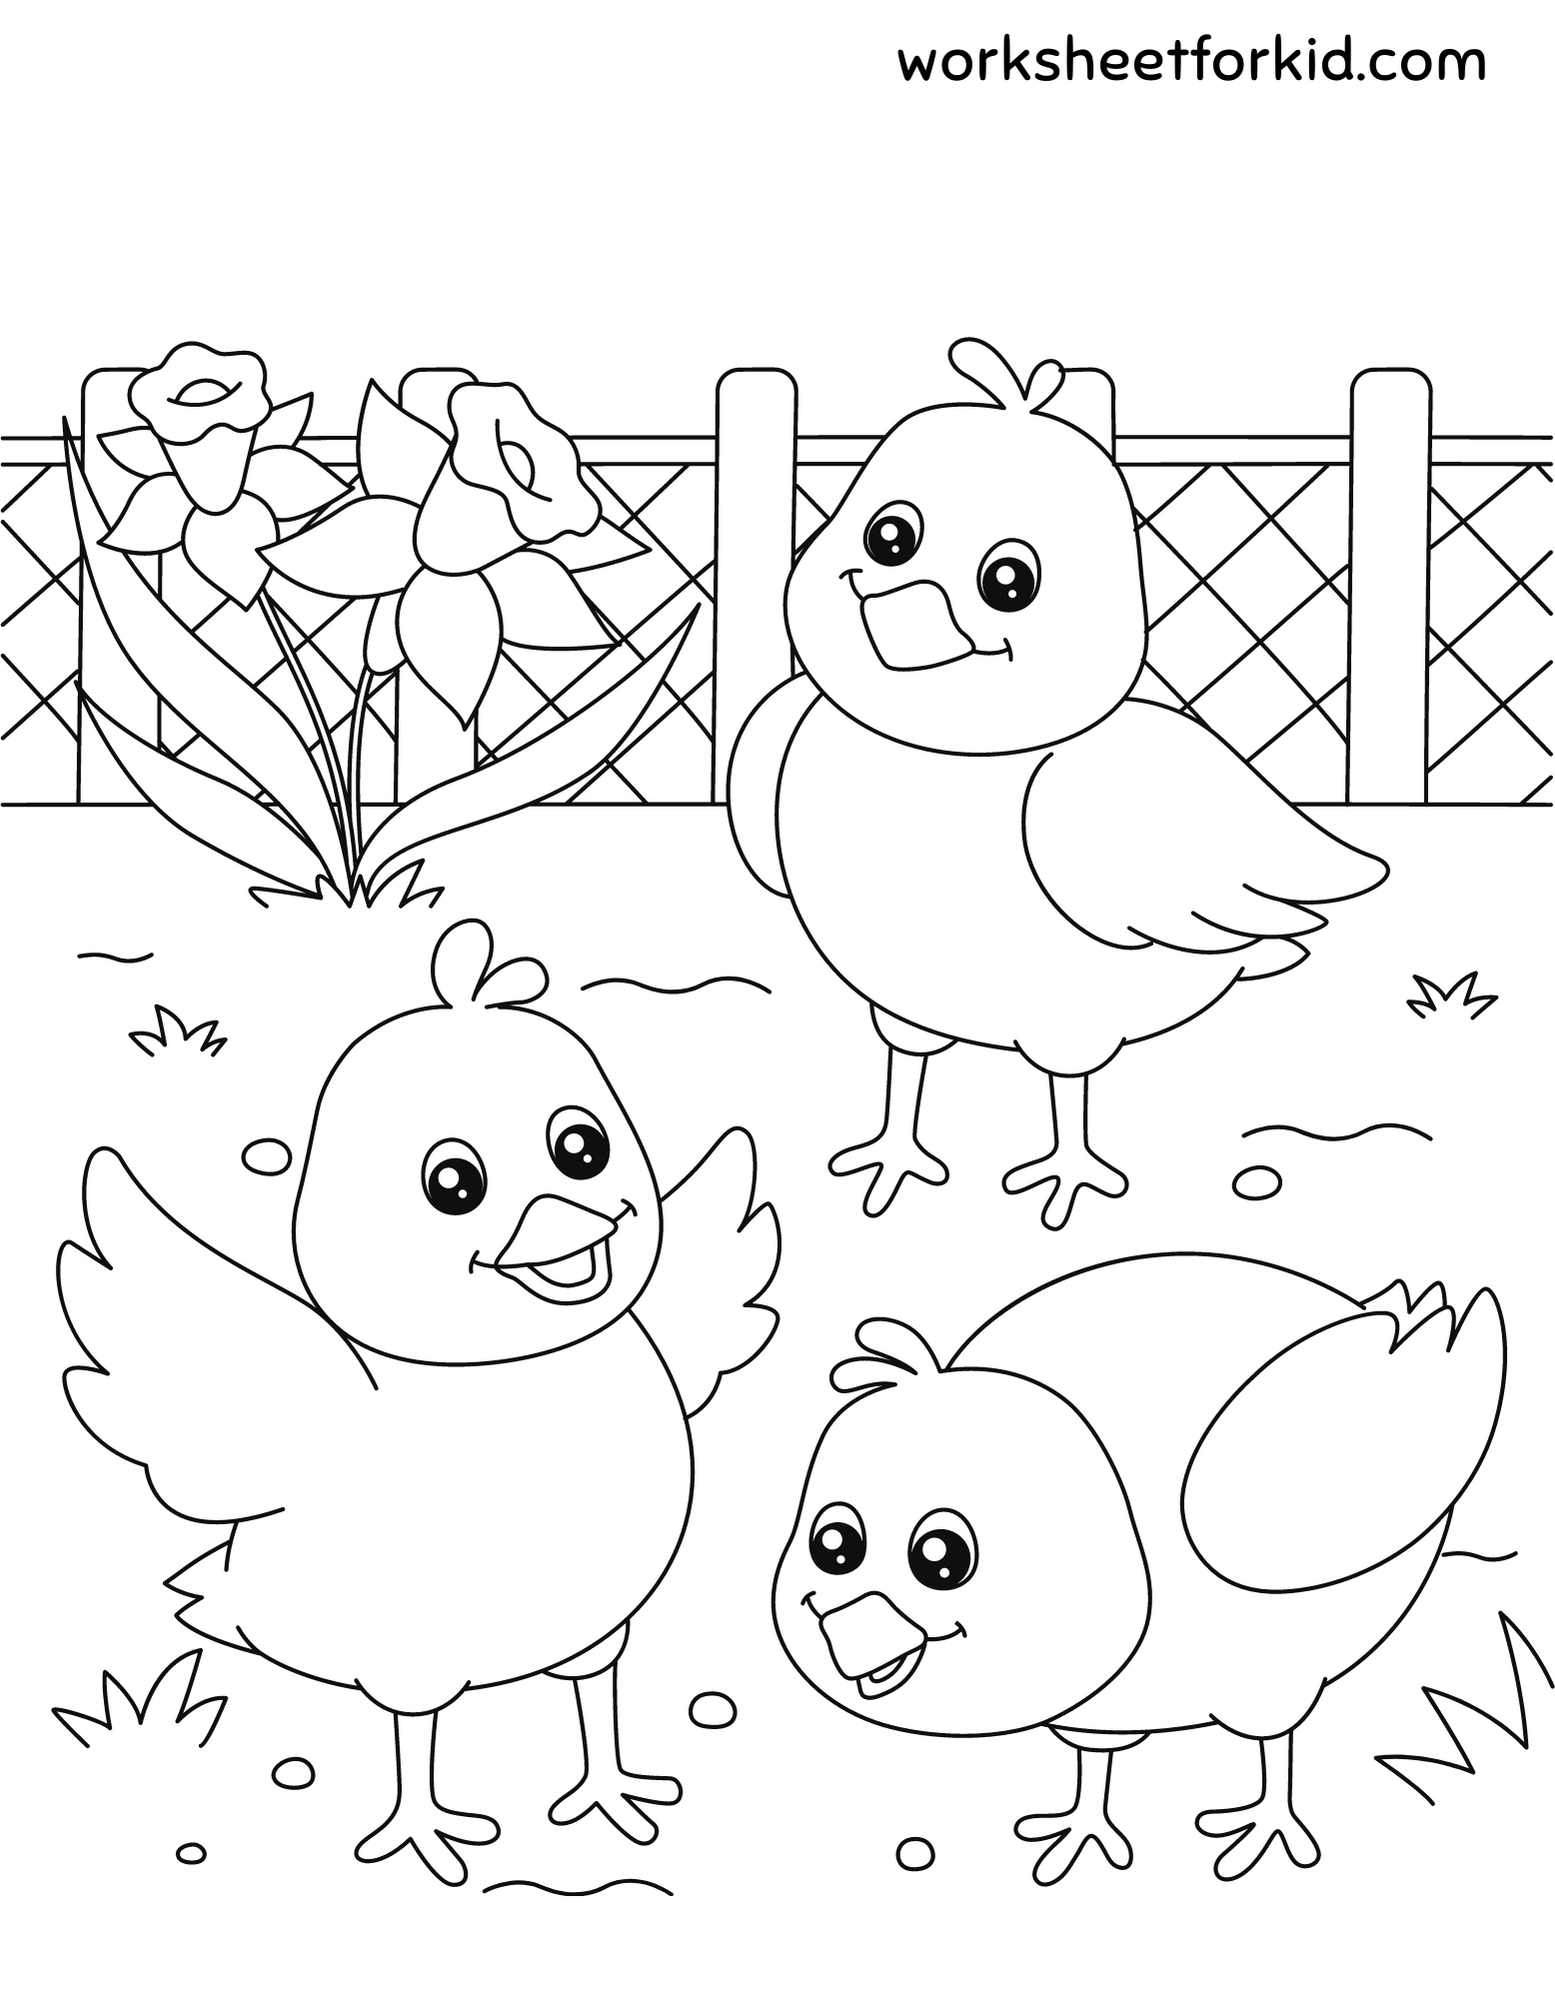 Free Animals Coloring Pages-22